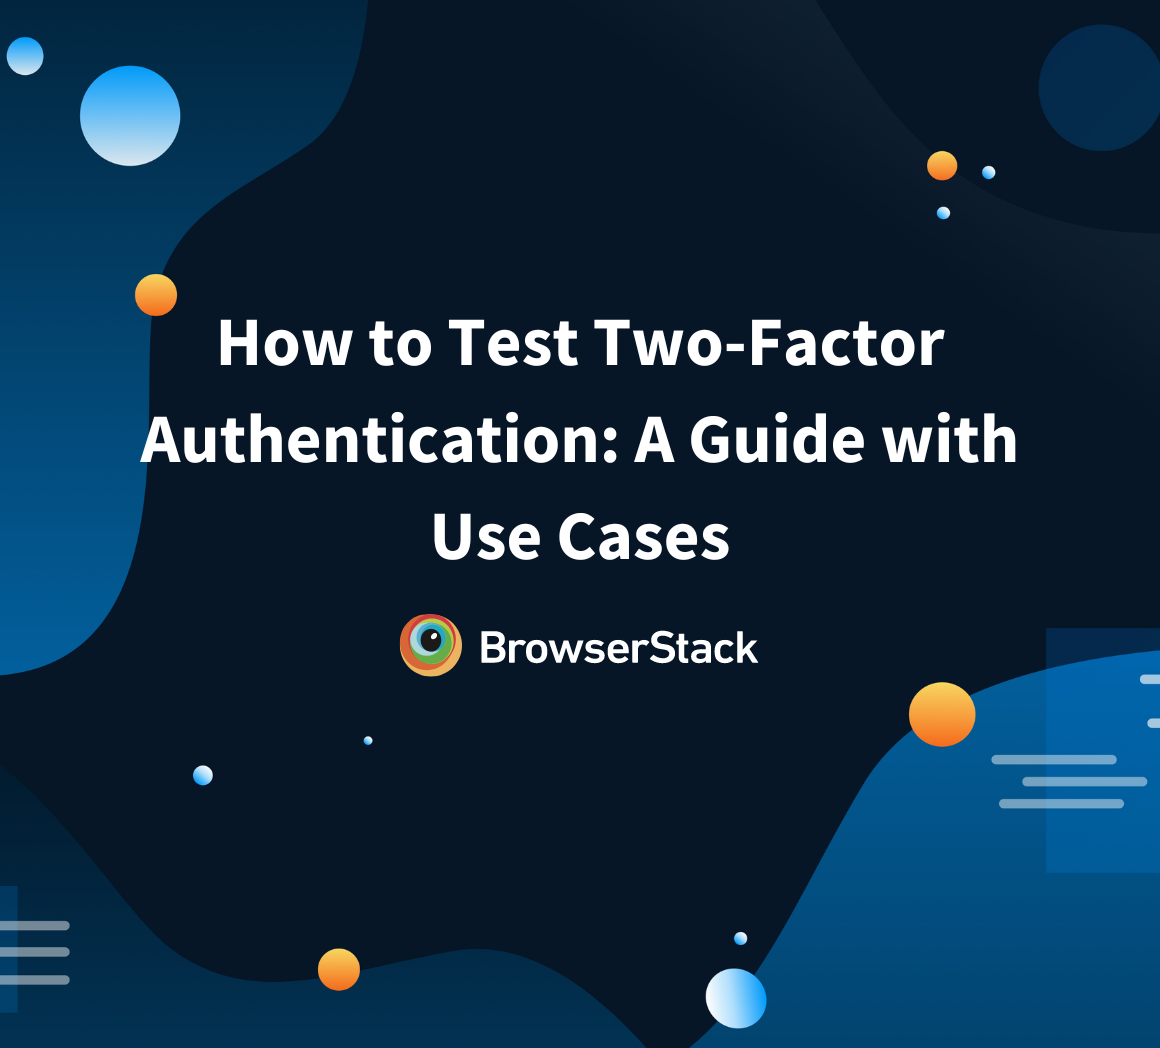 How to Test Two-Factor Authentication: A Guide with Use Cases